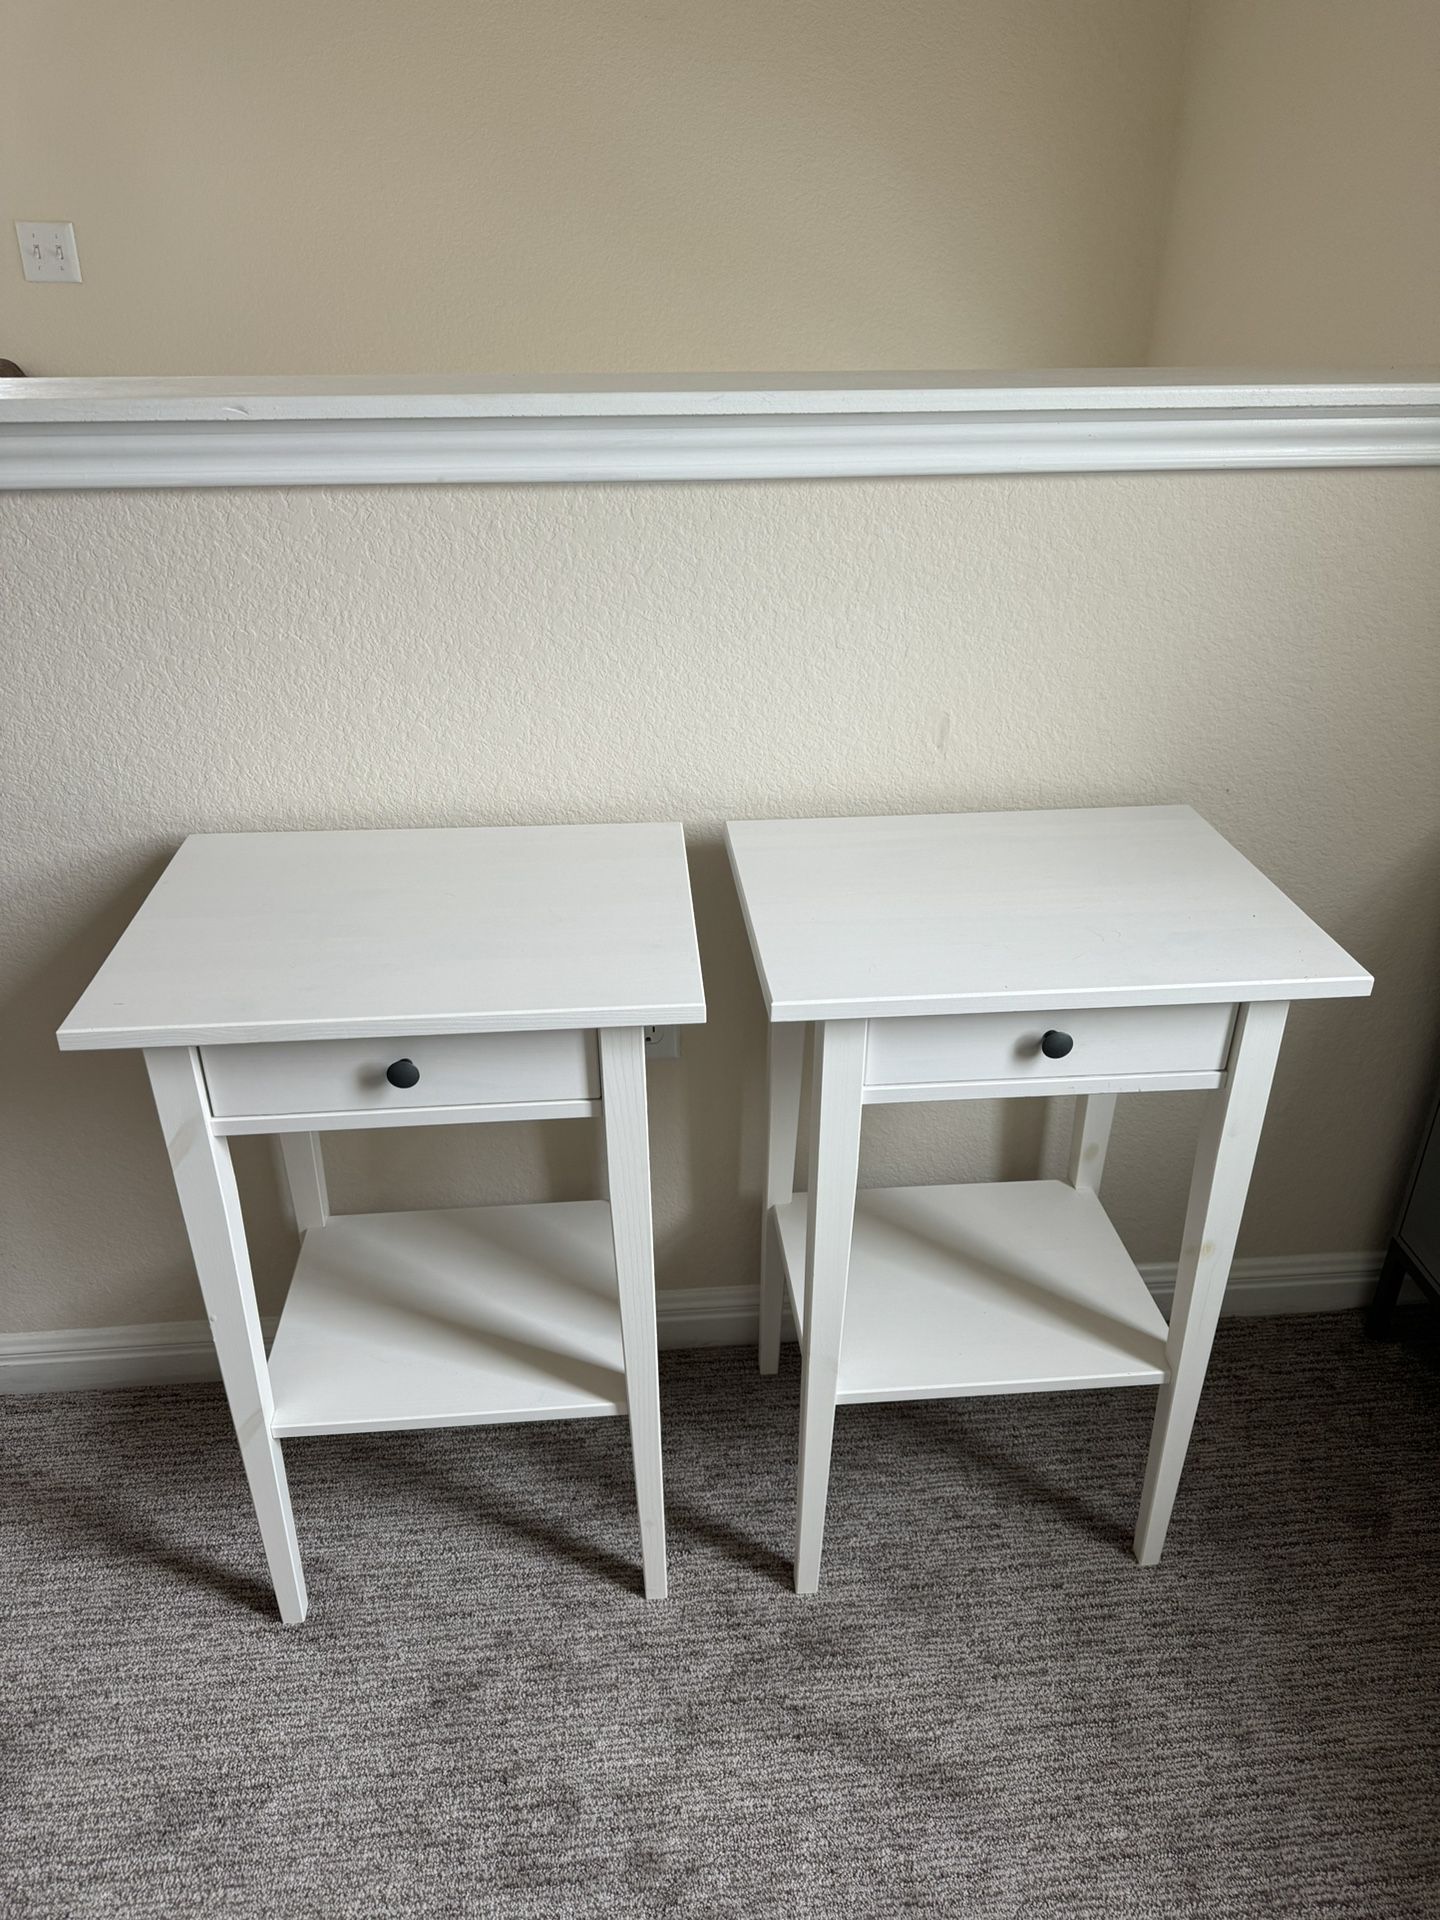 IKEA White Hemnes Wood One Drawer Night Stands Bedside Tables